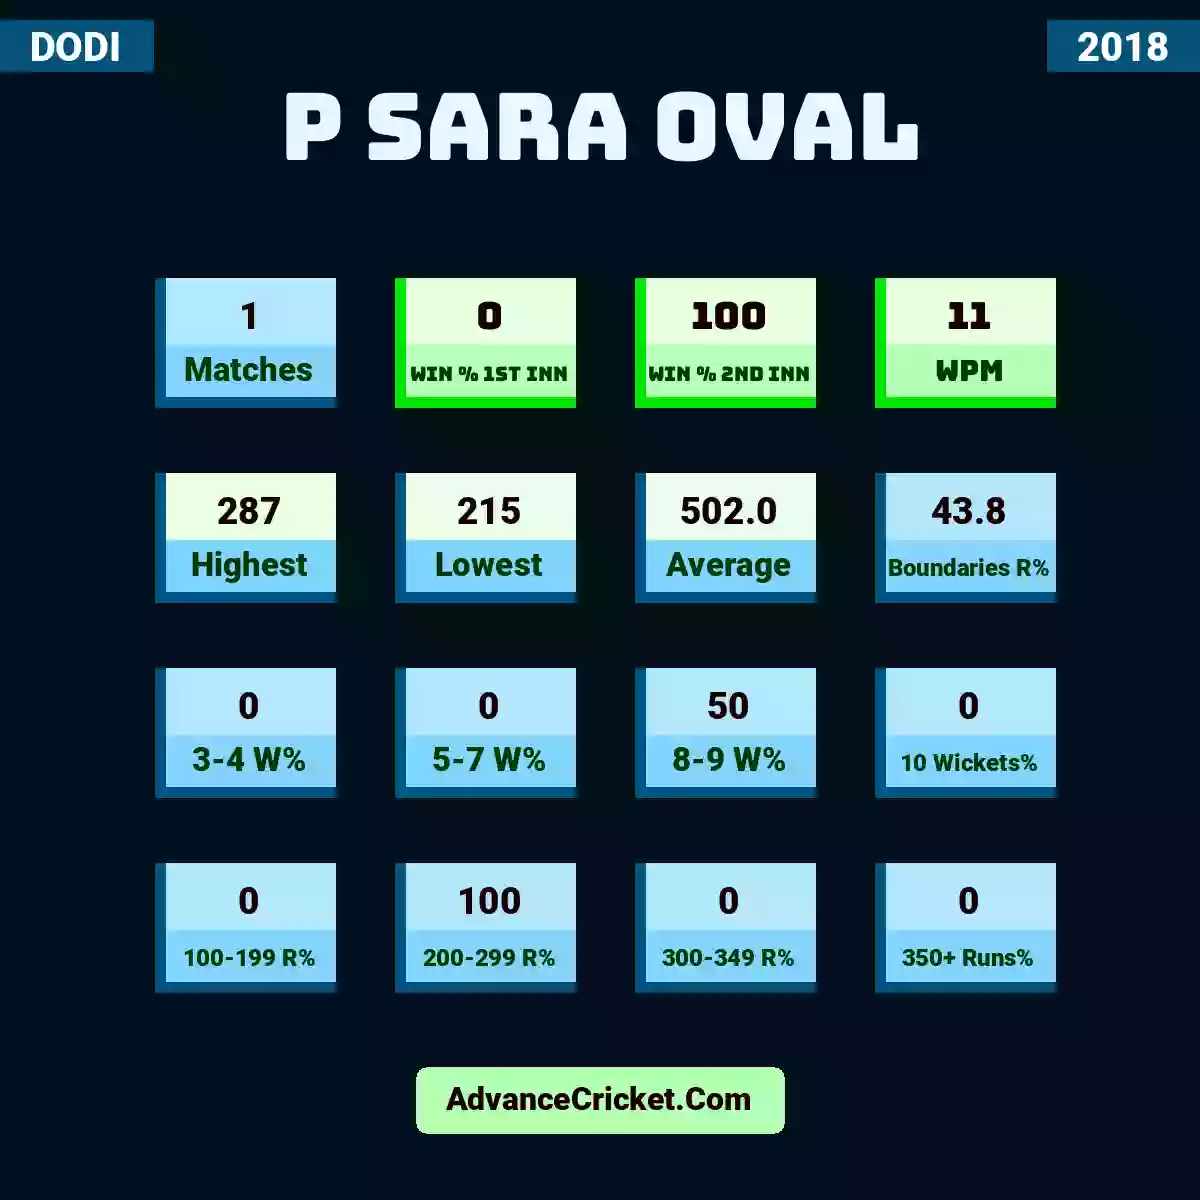 Image showing P Sara Oval with Matches: 1, Win % 1st Inn: 0, Win % 2nd Inn: 100, WPM: 11, Highest: 287, Lowest: 215, Average: 502.0, Boundaries R%: 43.8, 3-4 W%: 0, 5-7 W%: 0, 8-9 W%: 50, 10 Wickets%: 0, 100-199 R%: 0, 200-299 R%: 100, 300-349 R%: 0, 350+ Runs%: 0.